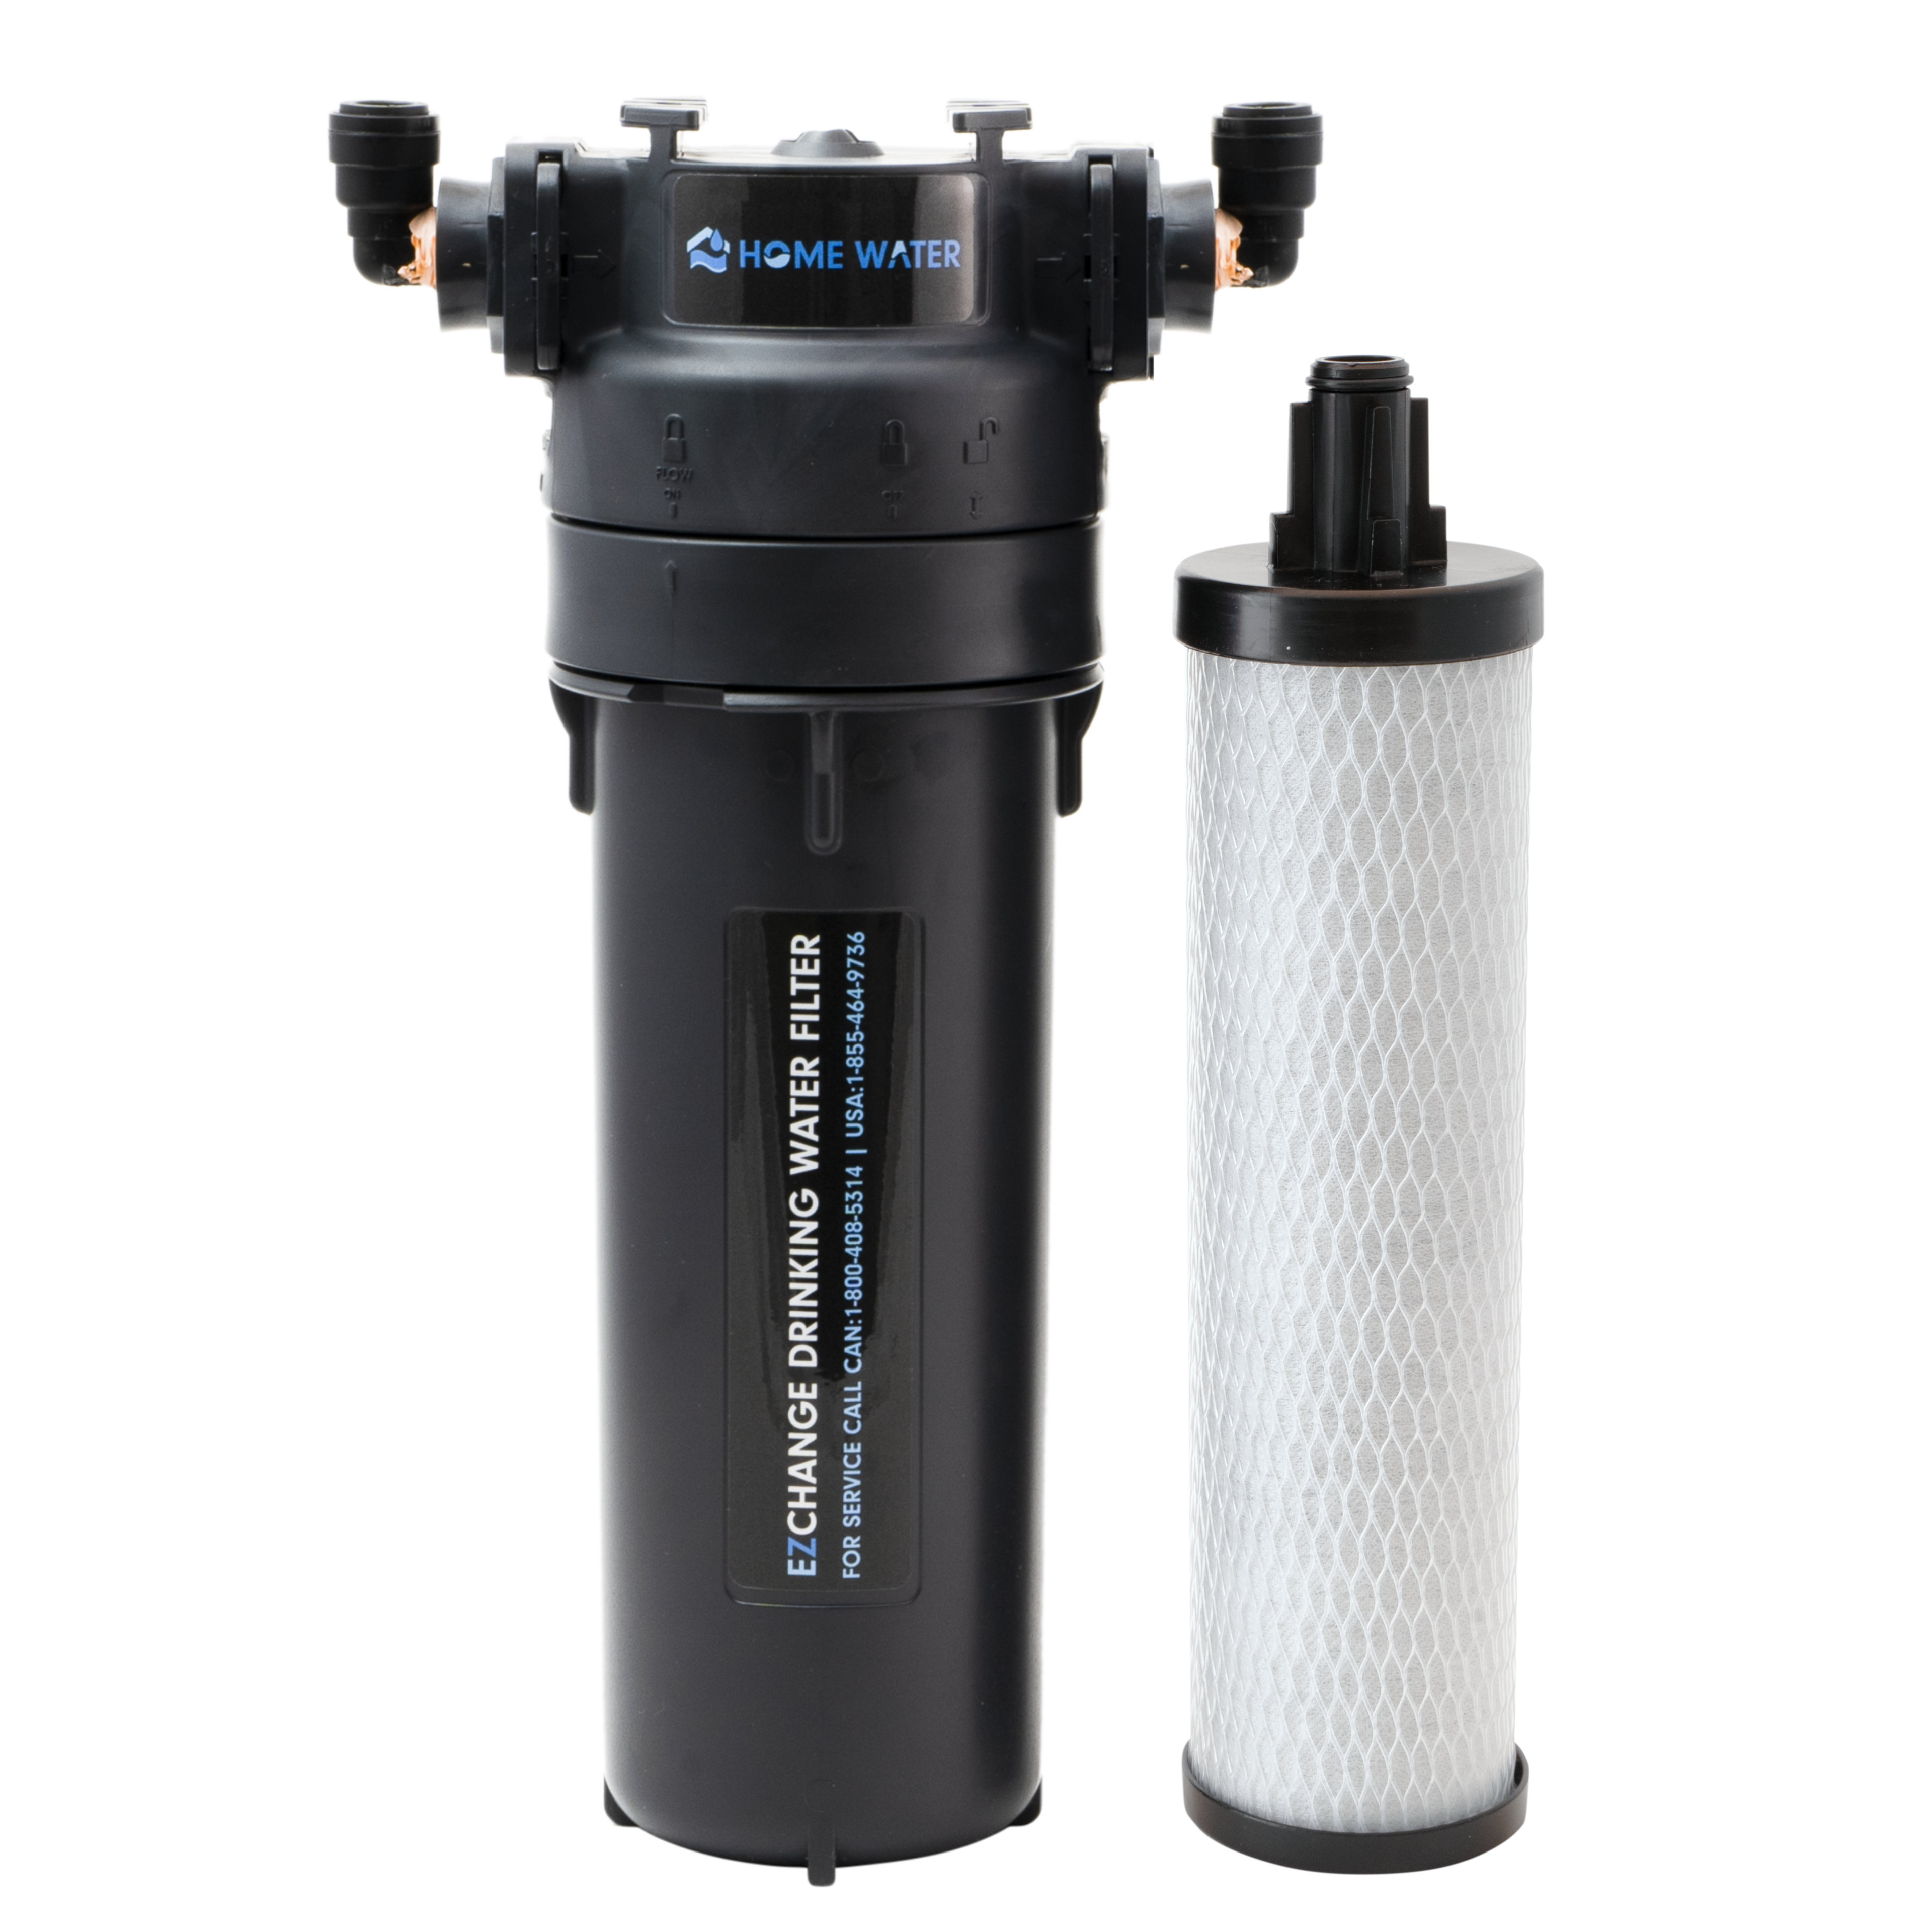 HomeWater EZChange Direct Connect Chlorine Filter